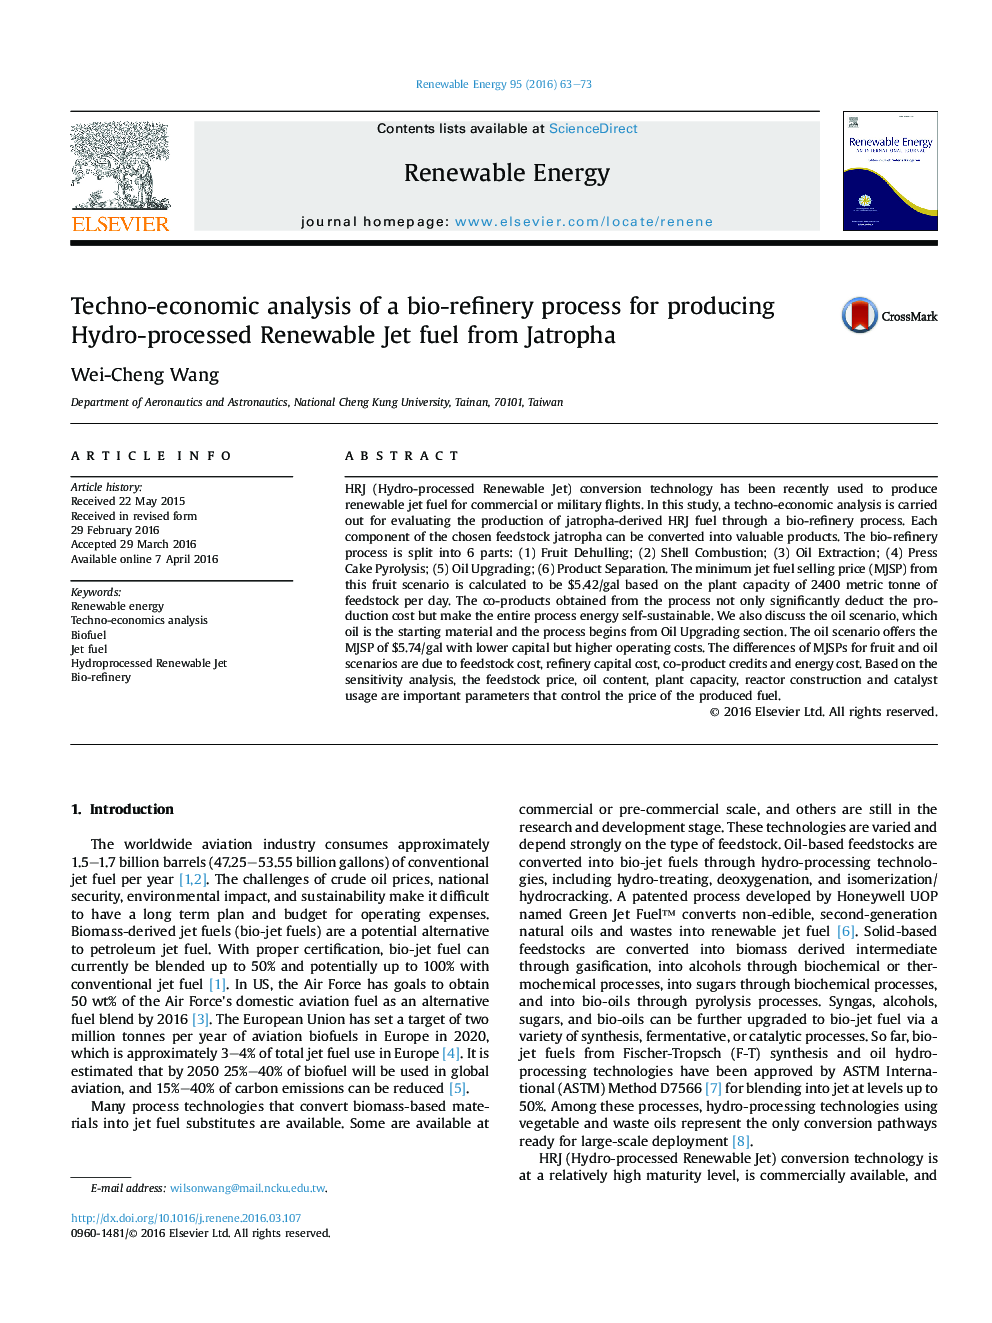 Techno-economic analysis of a bio-refinery process for producing Hydro-processed Renewable Jet fuel from Jatropha